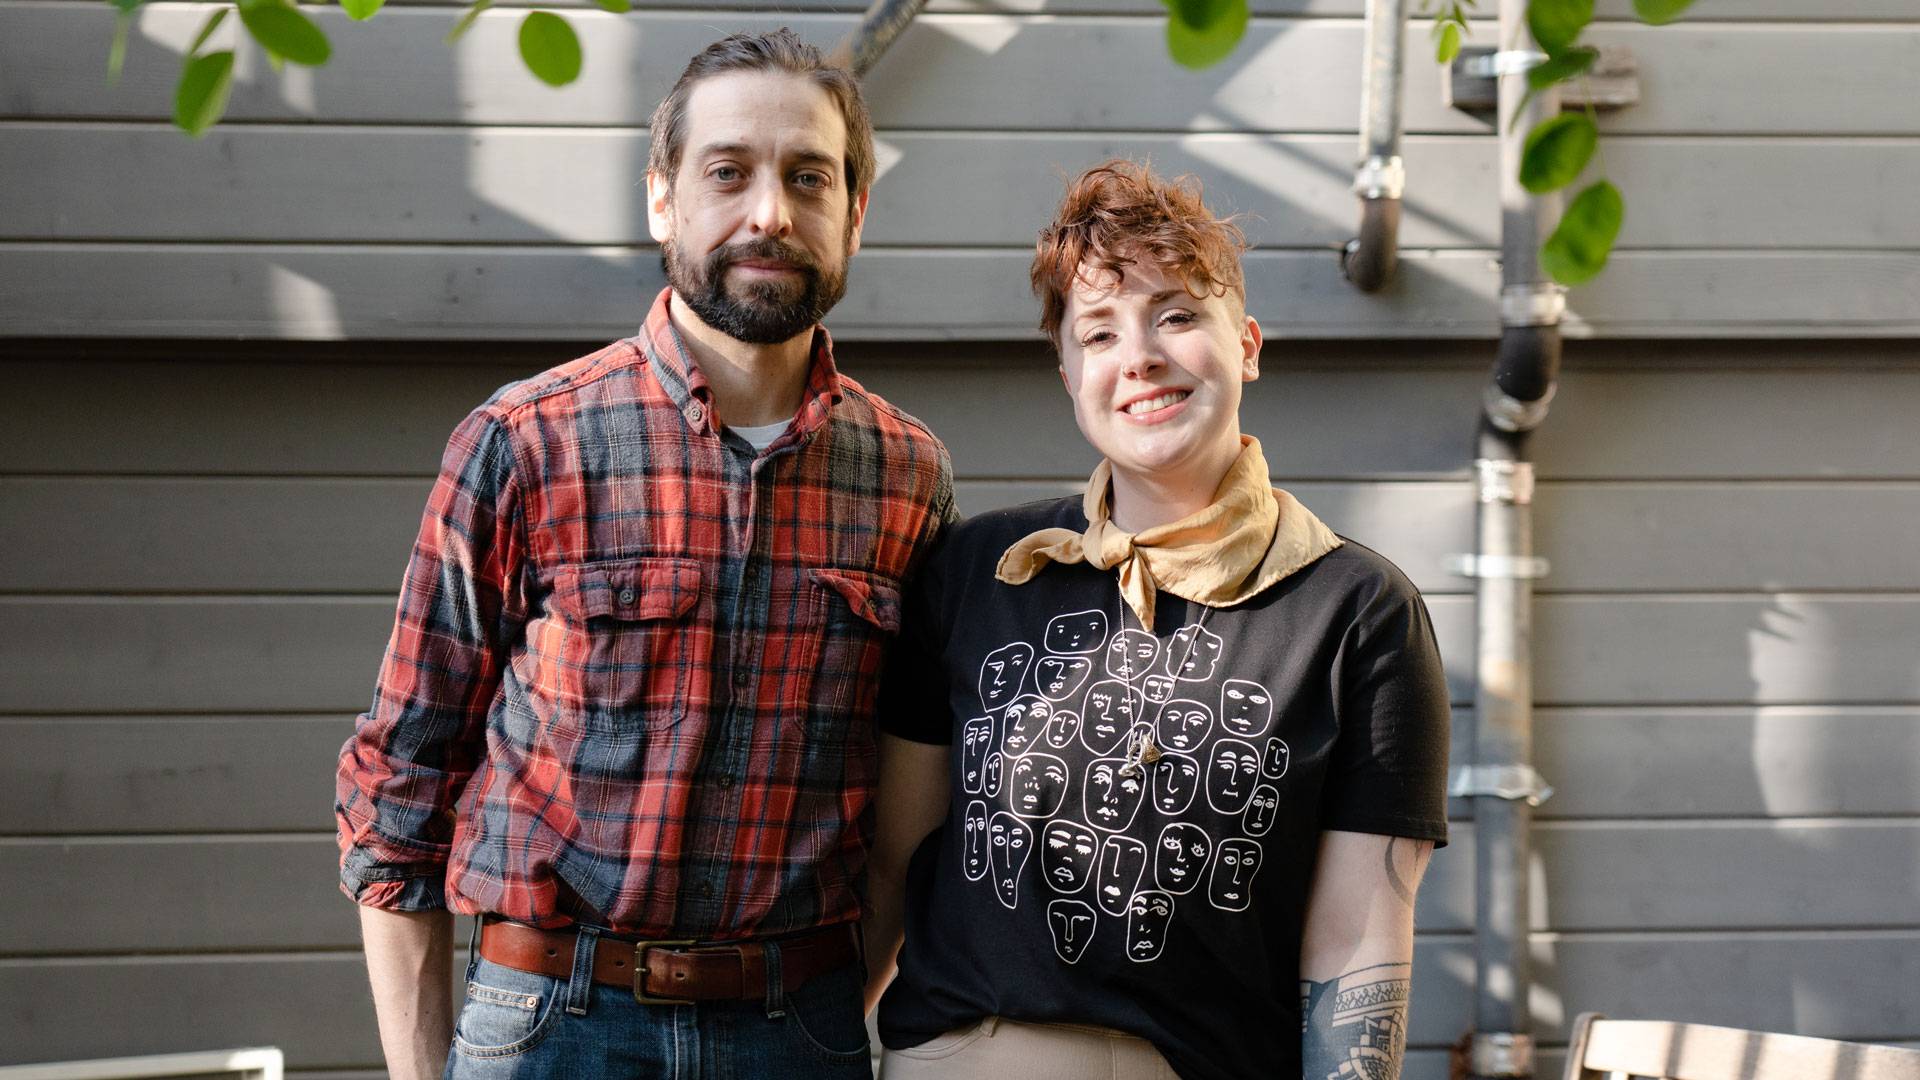 Ryan and Andrea Taylor started Ry's Knives to supplant lost income. Graham Holoch / KQED